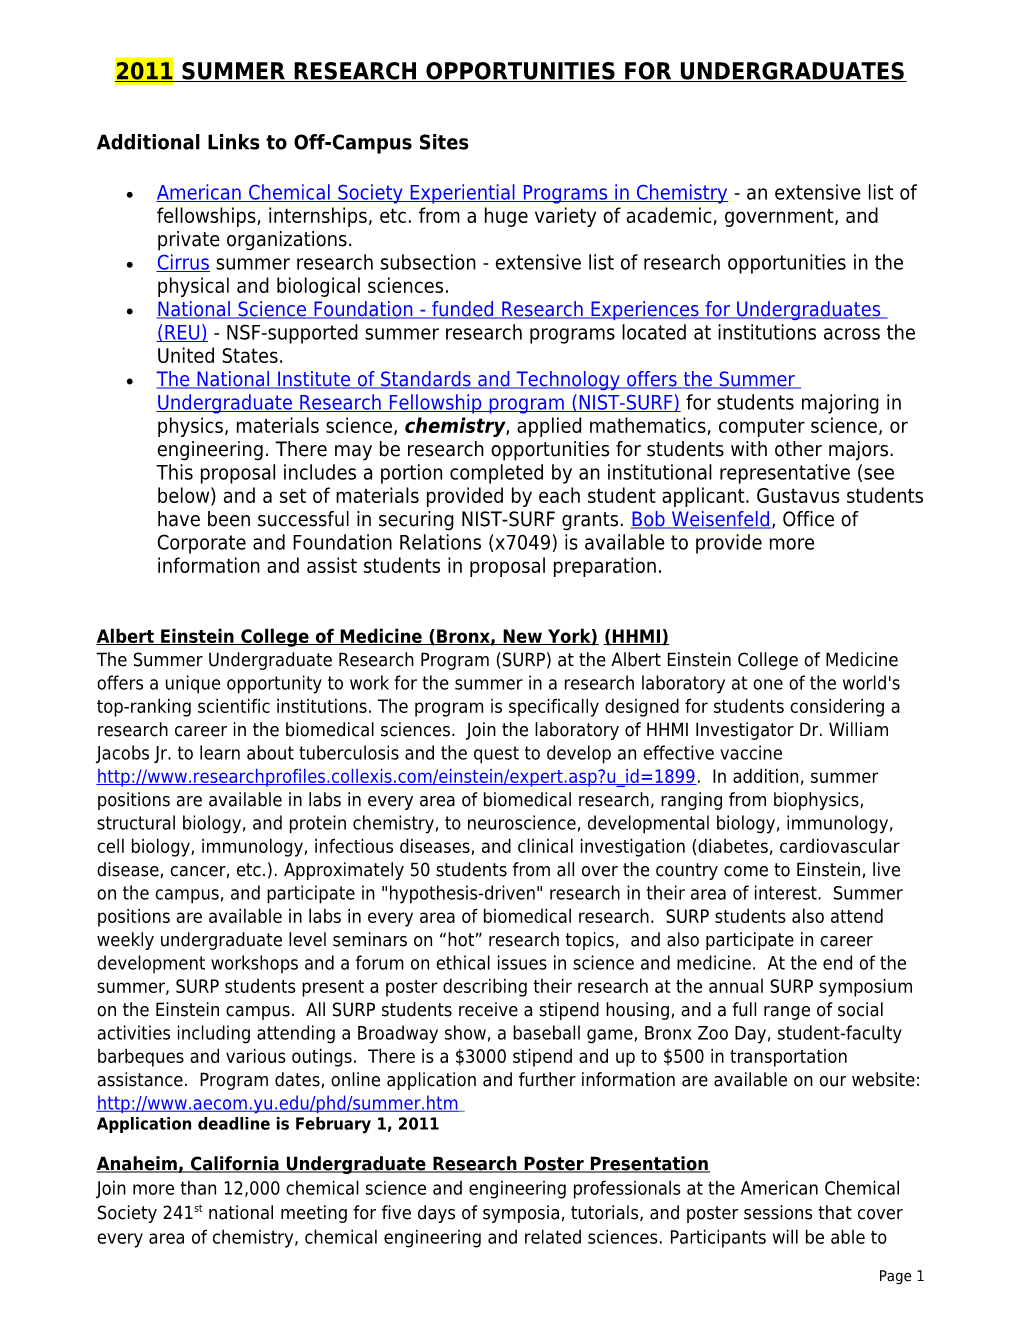 2011 Summer Research Opportunities for Undergraduates